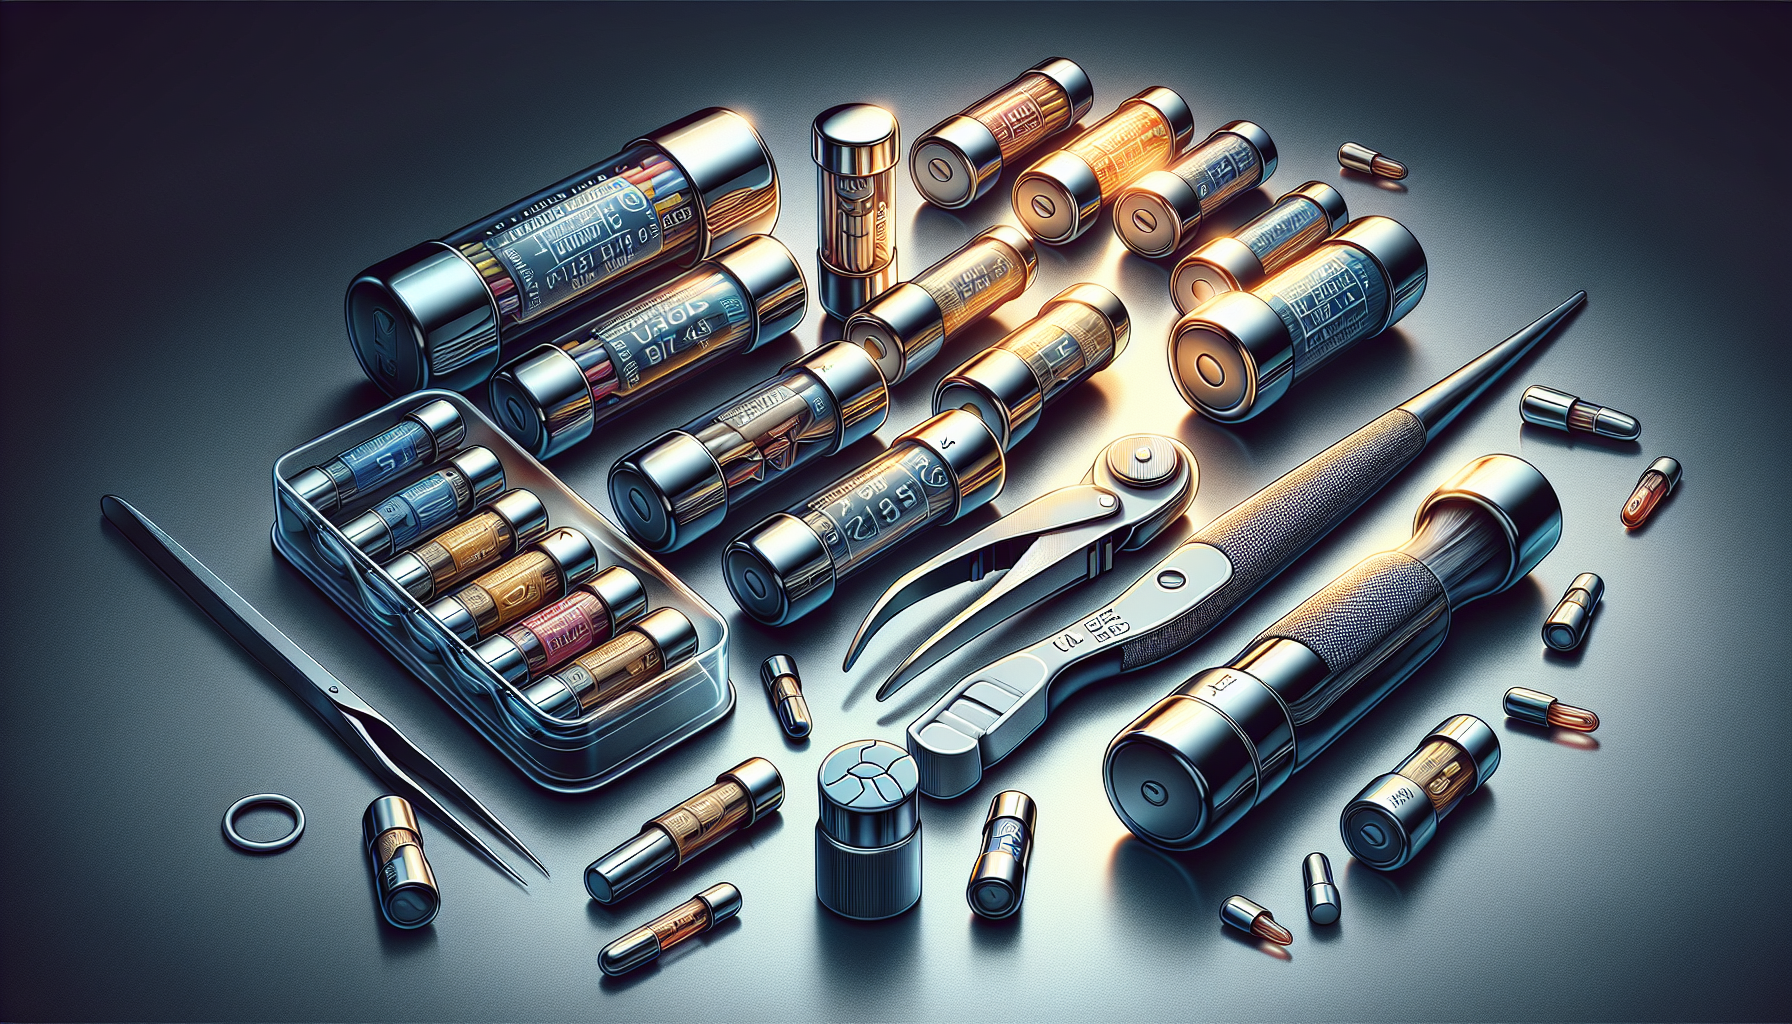 Fuse replacement tools